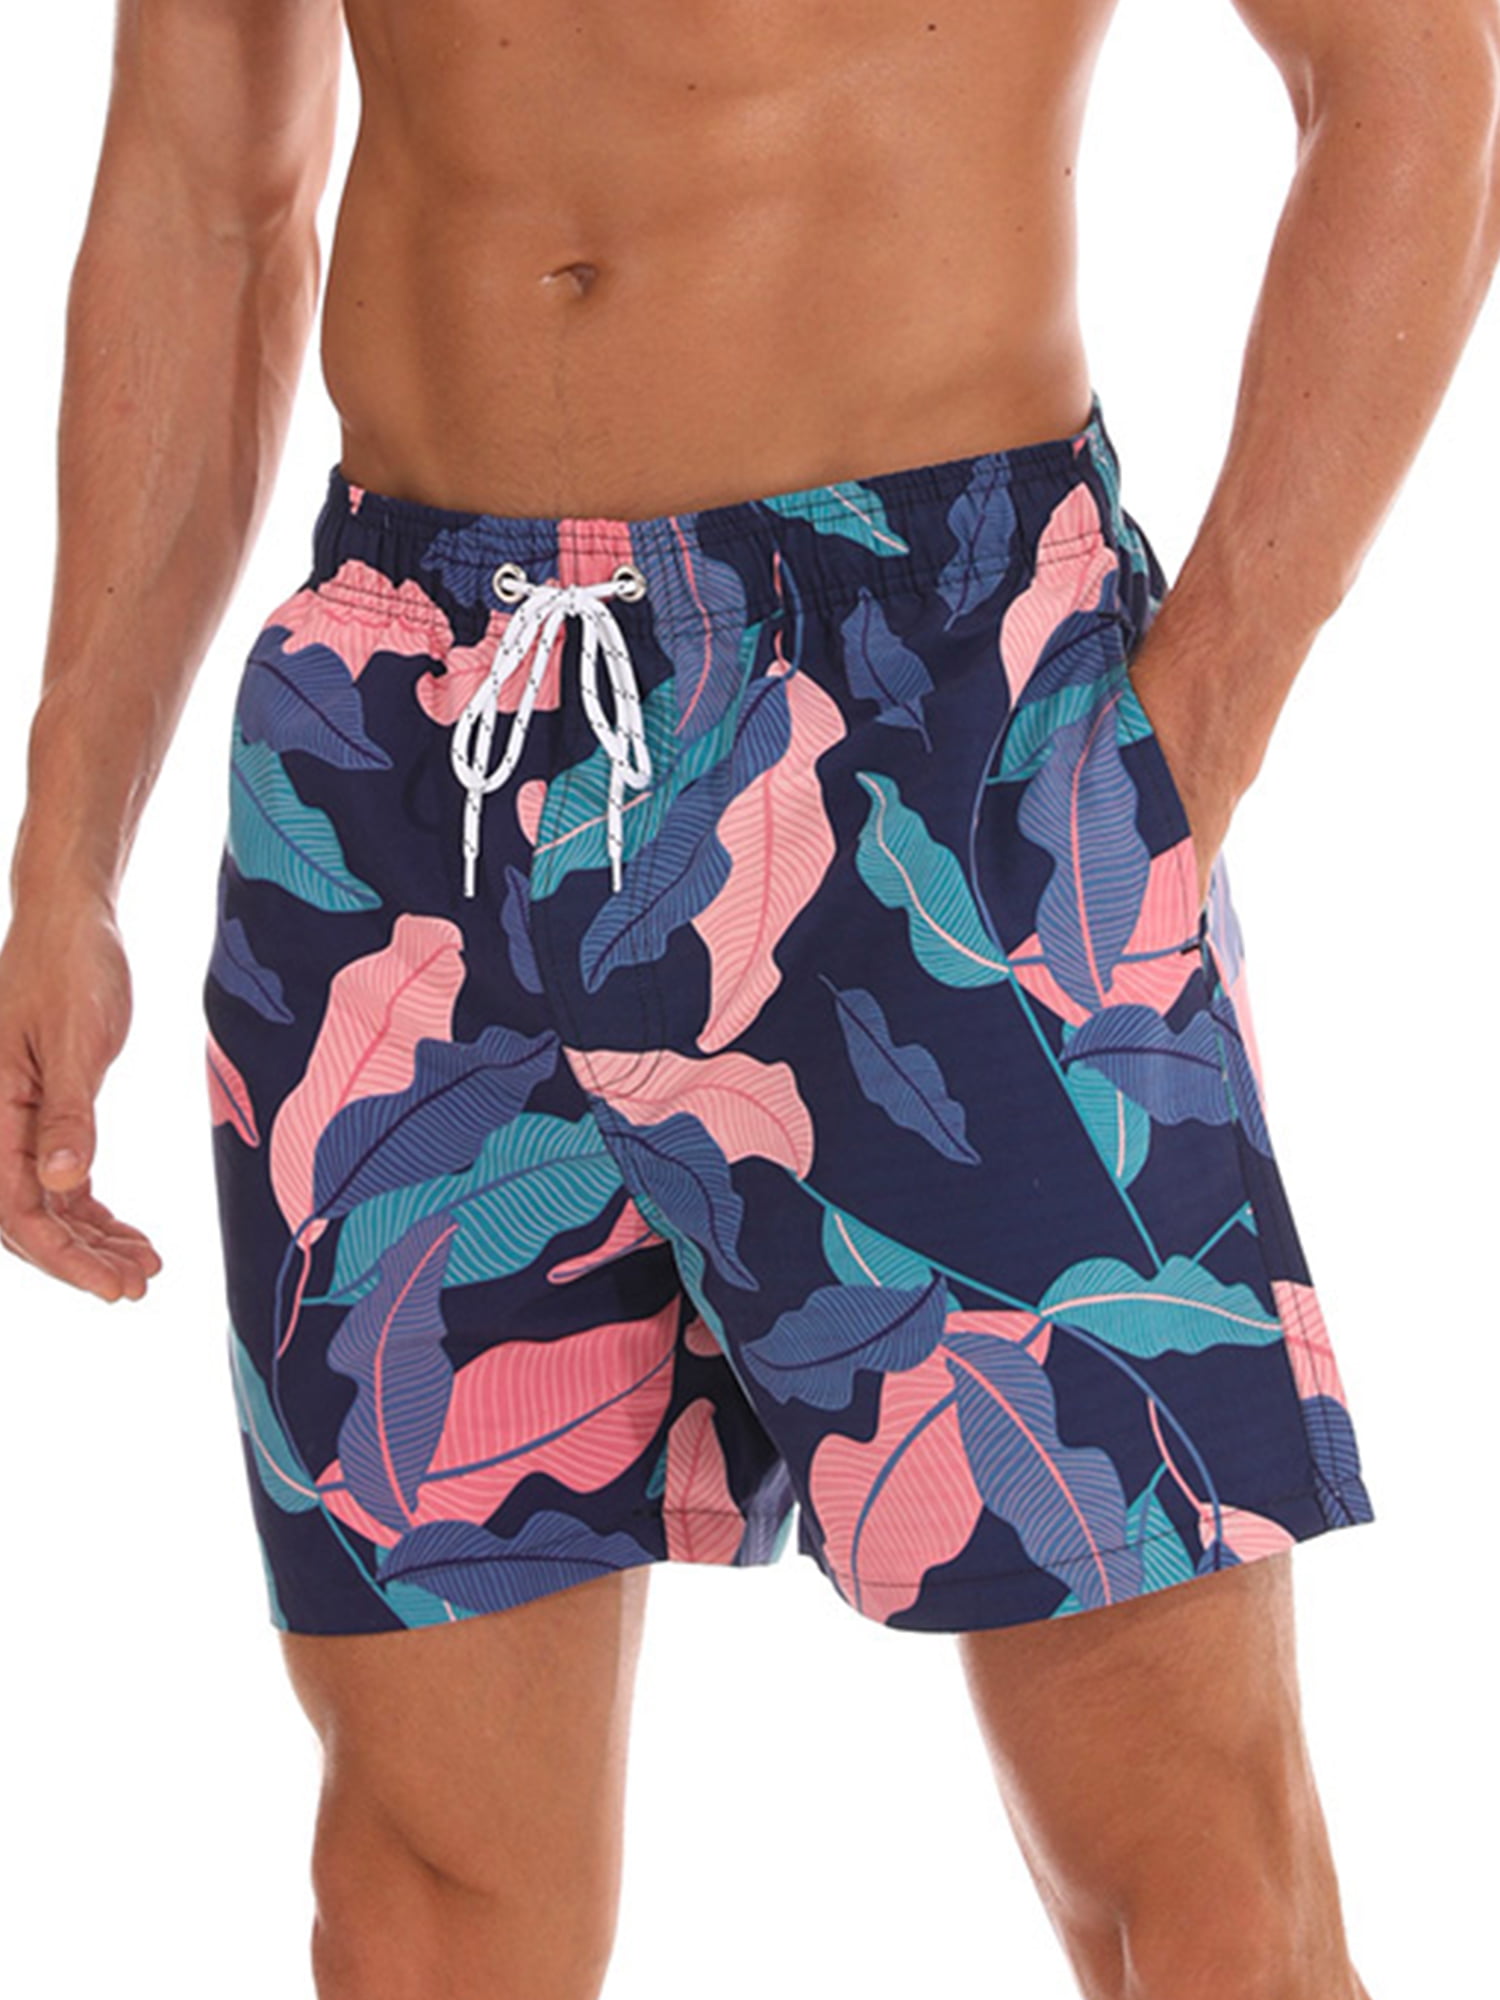 Gdewcro Autumn Camoflauge Mens Beach Board Shorts Quick Dry Swim Trunk with Mesh Lining and Pockets 